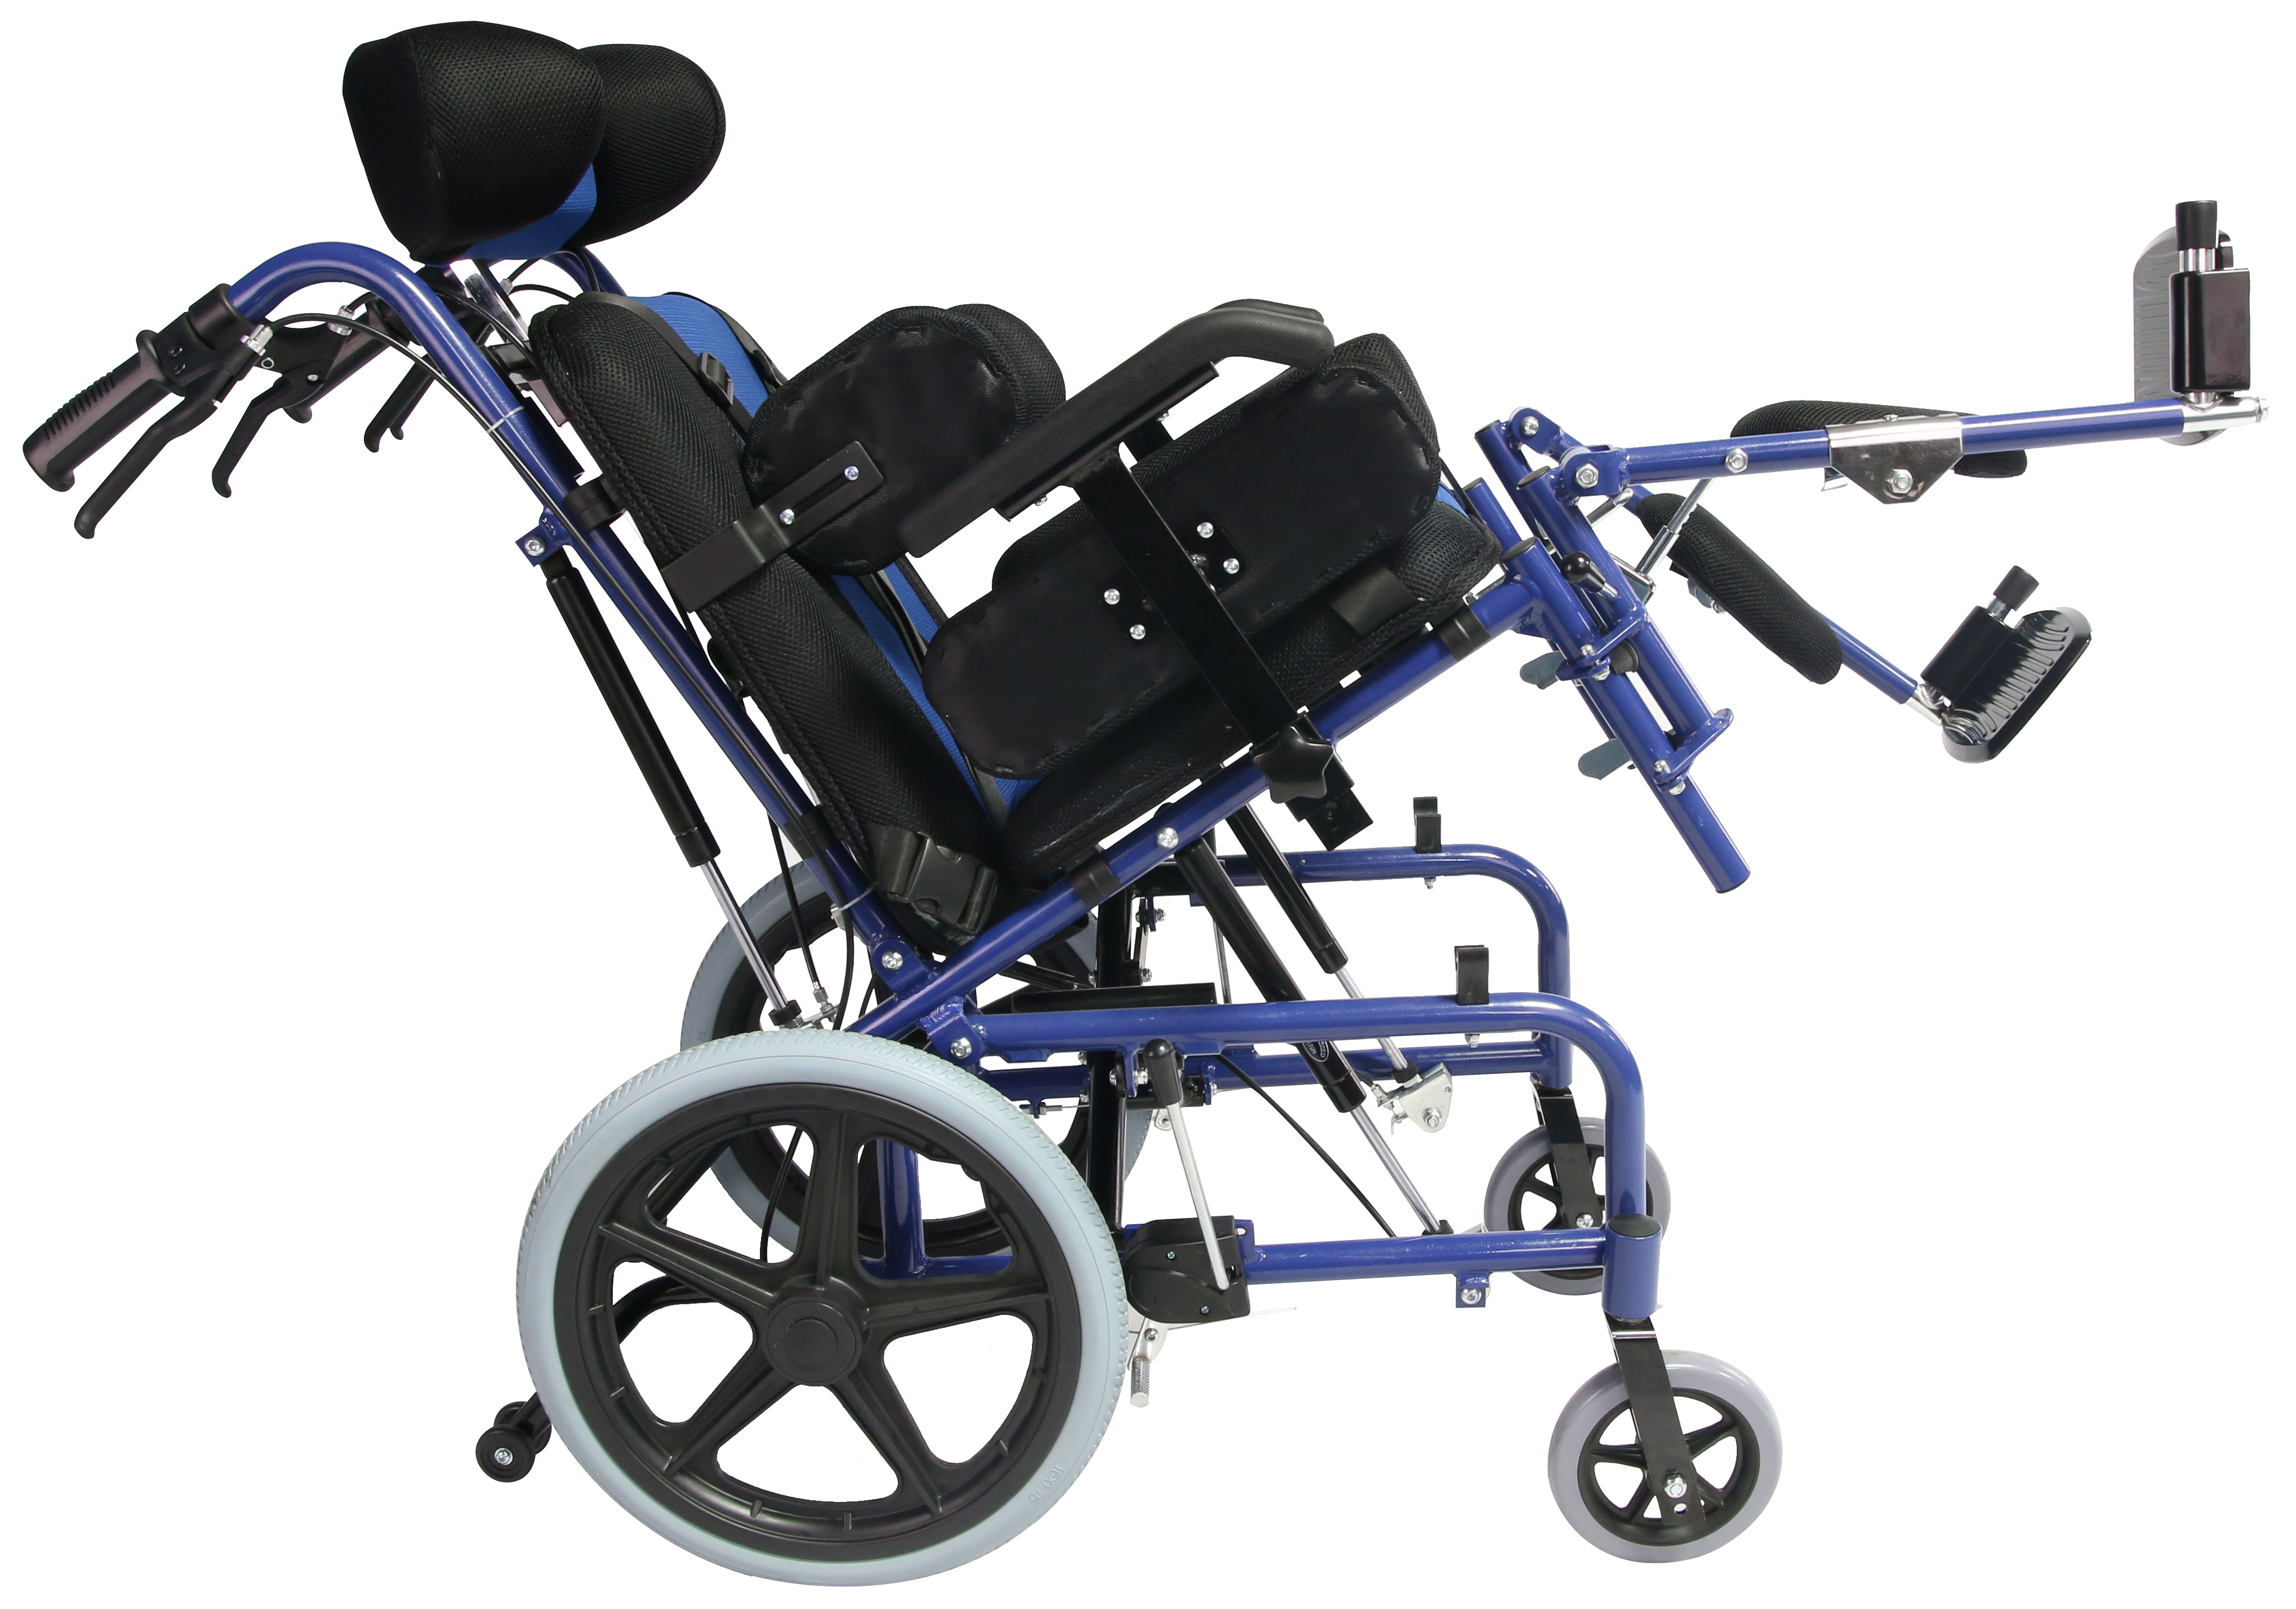 Assitance Positioning Wheelchair For Cerebral Palsy Manufacturers, Assitance Positioning Wheelchair For Cerebral Palsy Factory, Supply Assitance Positioning Wheelchair For Cerebral Palsy